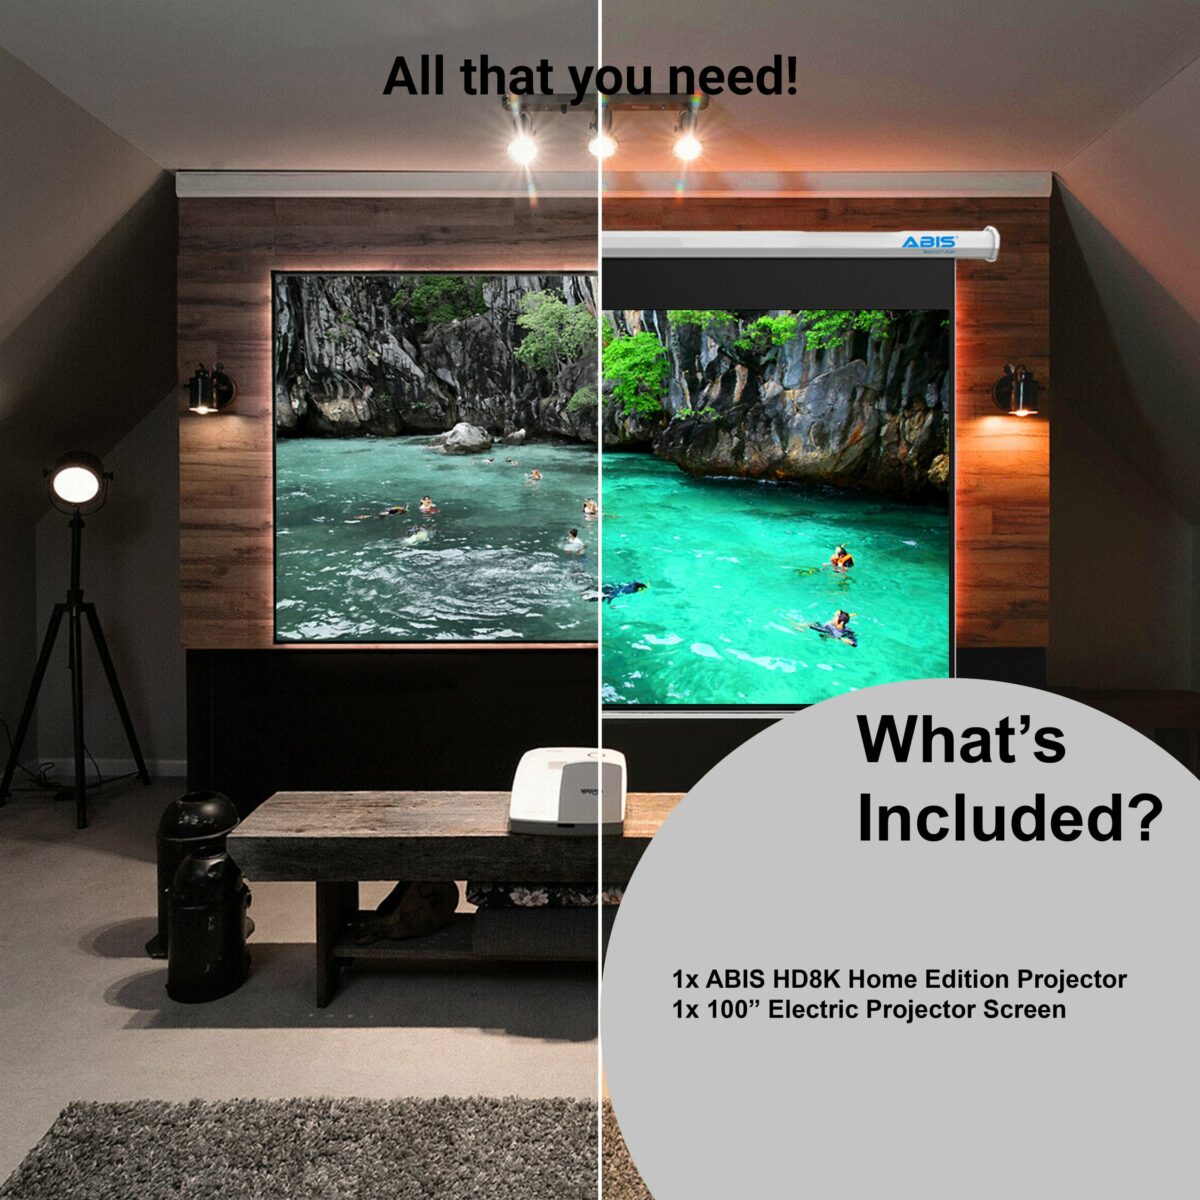 100" Electric Projector Screen & Projector  Bundle with Android TV Stick for Home - ABIS